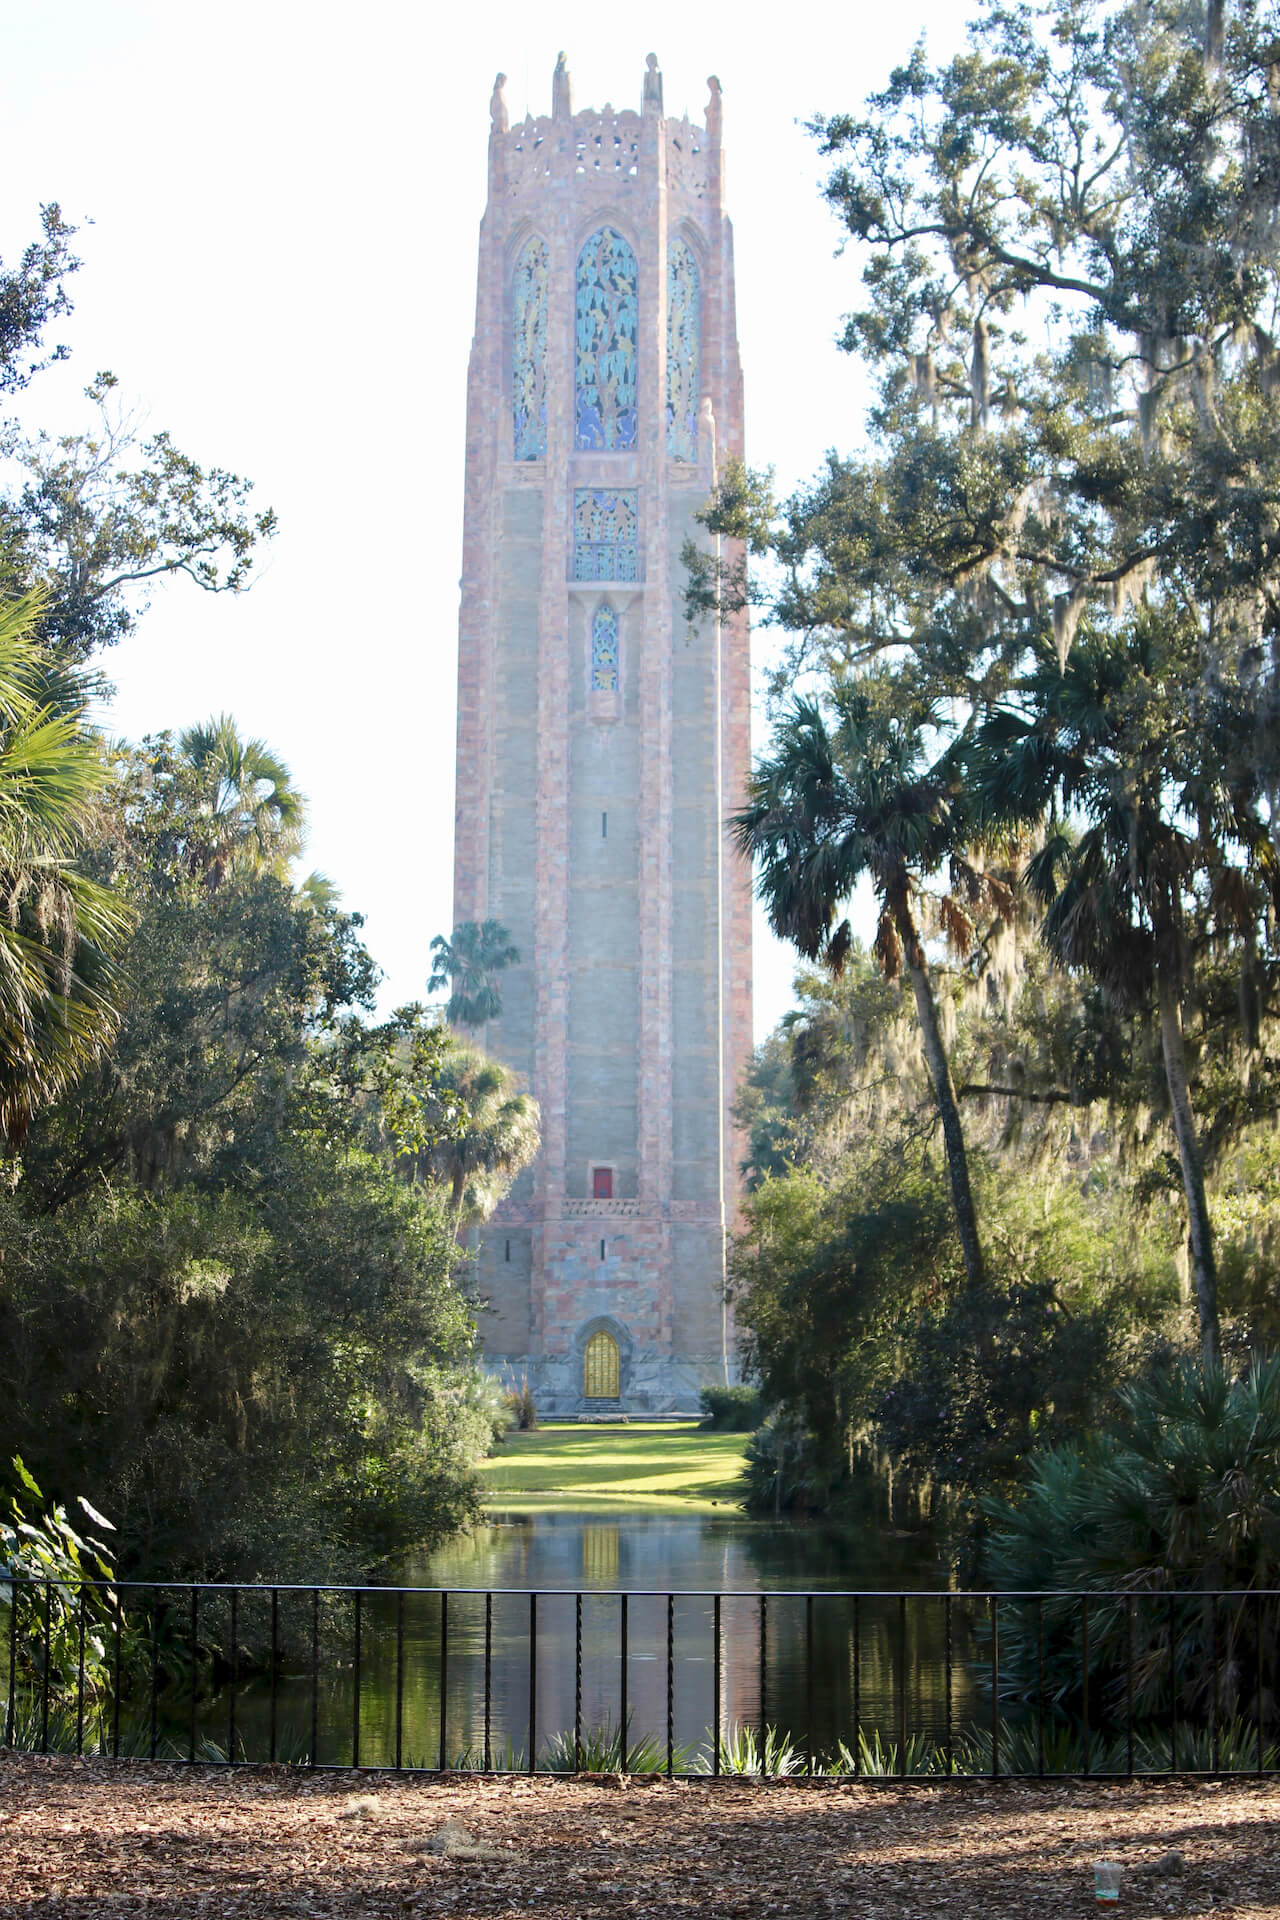 Explore 50 acres of meandering pathways and gardens, listen to the beautiful bells of the Singing Tower carillon, and stroll through a Mediterranean-style mansion at Bok Tower Gardens Lake Wales, Florida. Must Do Visitor Guides | MustDo.com. Photo by Nita Ettinger